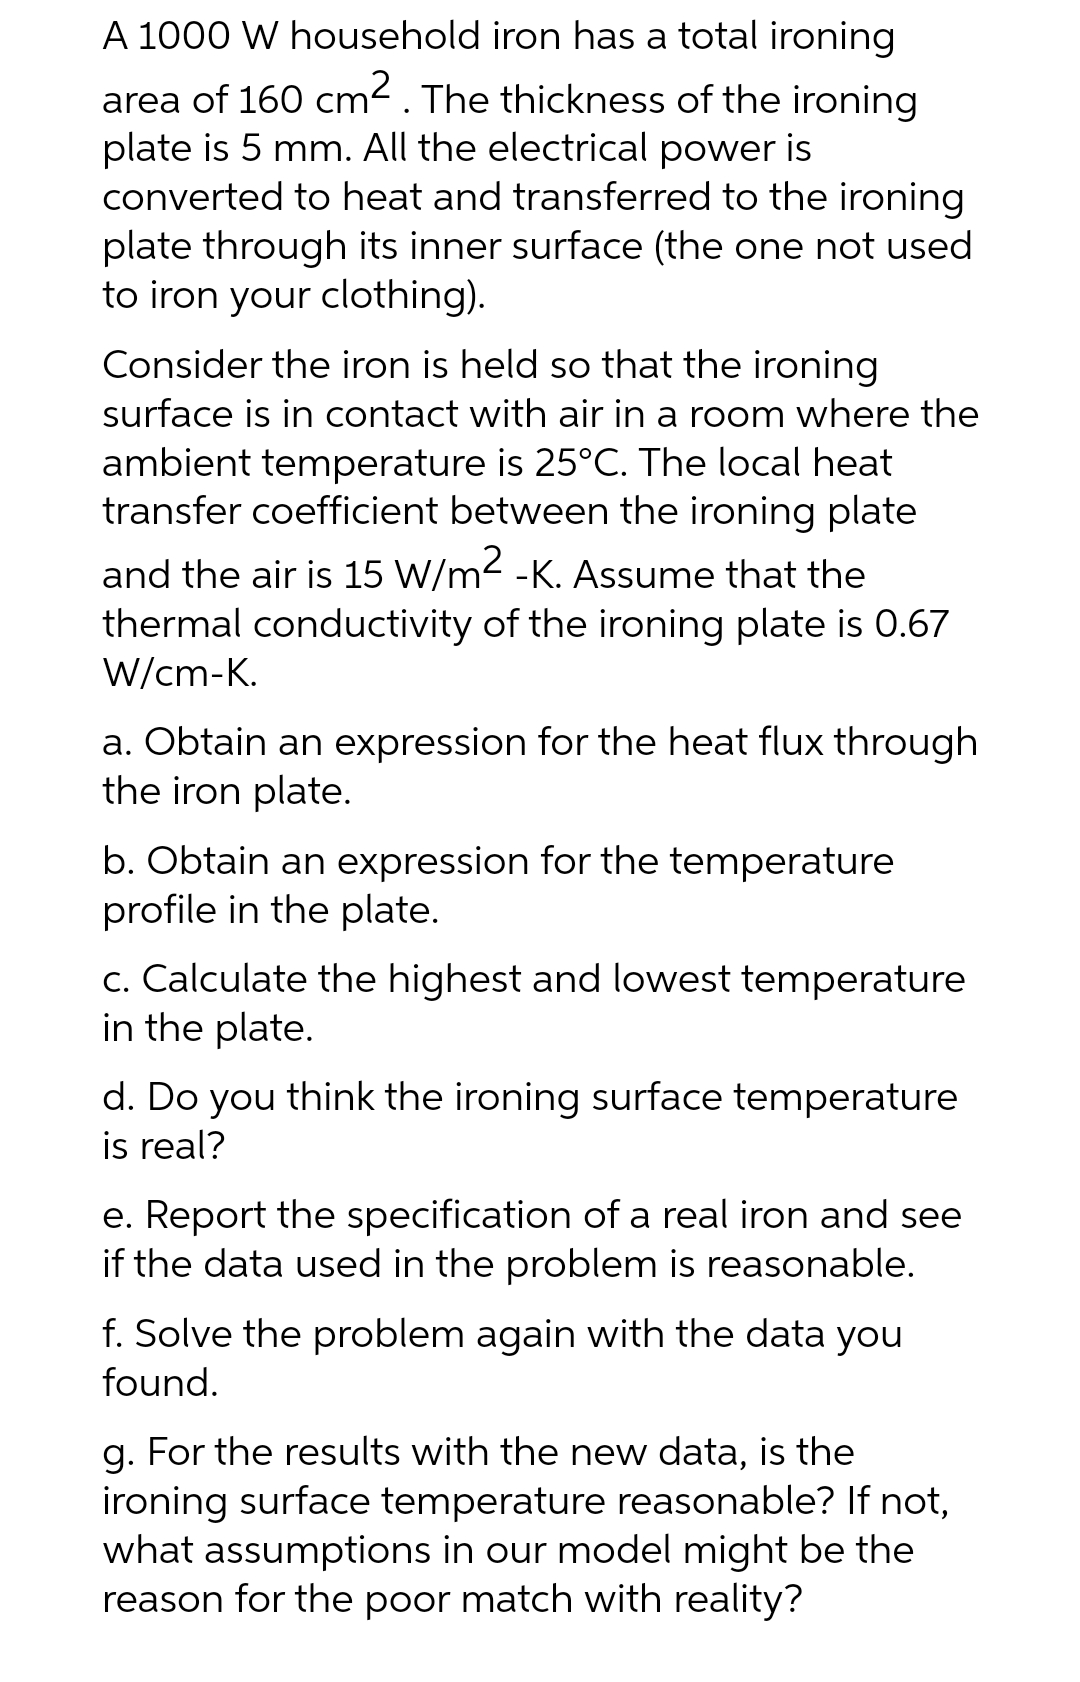 A 1000 W household iron has a total ironing
area of 160 cm². The thickness of the ironing
plate is 5 mm. All the electrical power is
converted to heat and transferred to the ironing
plate through its inner surface (the one not used
to iron your clothing).
Consider the iron is held so that the ironing
surface is in contact with air in a room where the
ambient temperature is 25°C. The local heat
transfer coefficient between the ironing plate
and the air is 15 W/m2 -K. Assume that the
thermal conductivity of the ironing plate is 0.67
W/cm-K.
a. Obtain an expression for the heat flux through
the iron plate.
b. Obtain an expression for the temperature
profile in the plate.
c. Calculate the highest and lowest temperature
in the plate.
d. Do you think the ironing surface temperature
is real?
e. Report the specification of a real iron and see
if the data used in the problem is reasonable.
f. Solve the problem again with the data you
found.
g. For the results with the new data, is the
ironing surface temperature reasonable? If not,
what assumptions in our model might be the
reason for the poor match with reality?